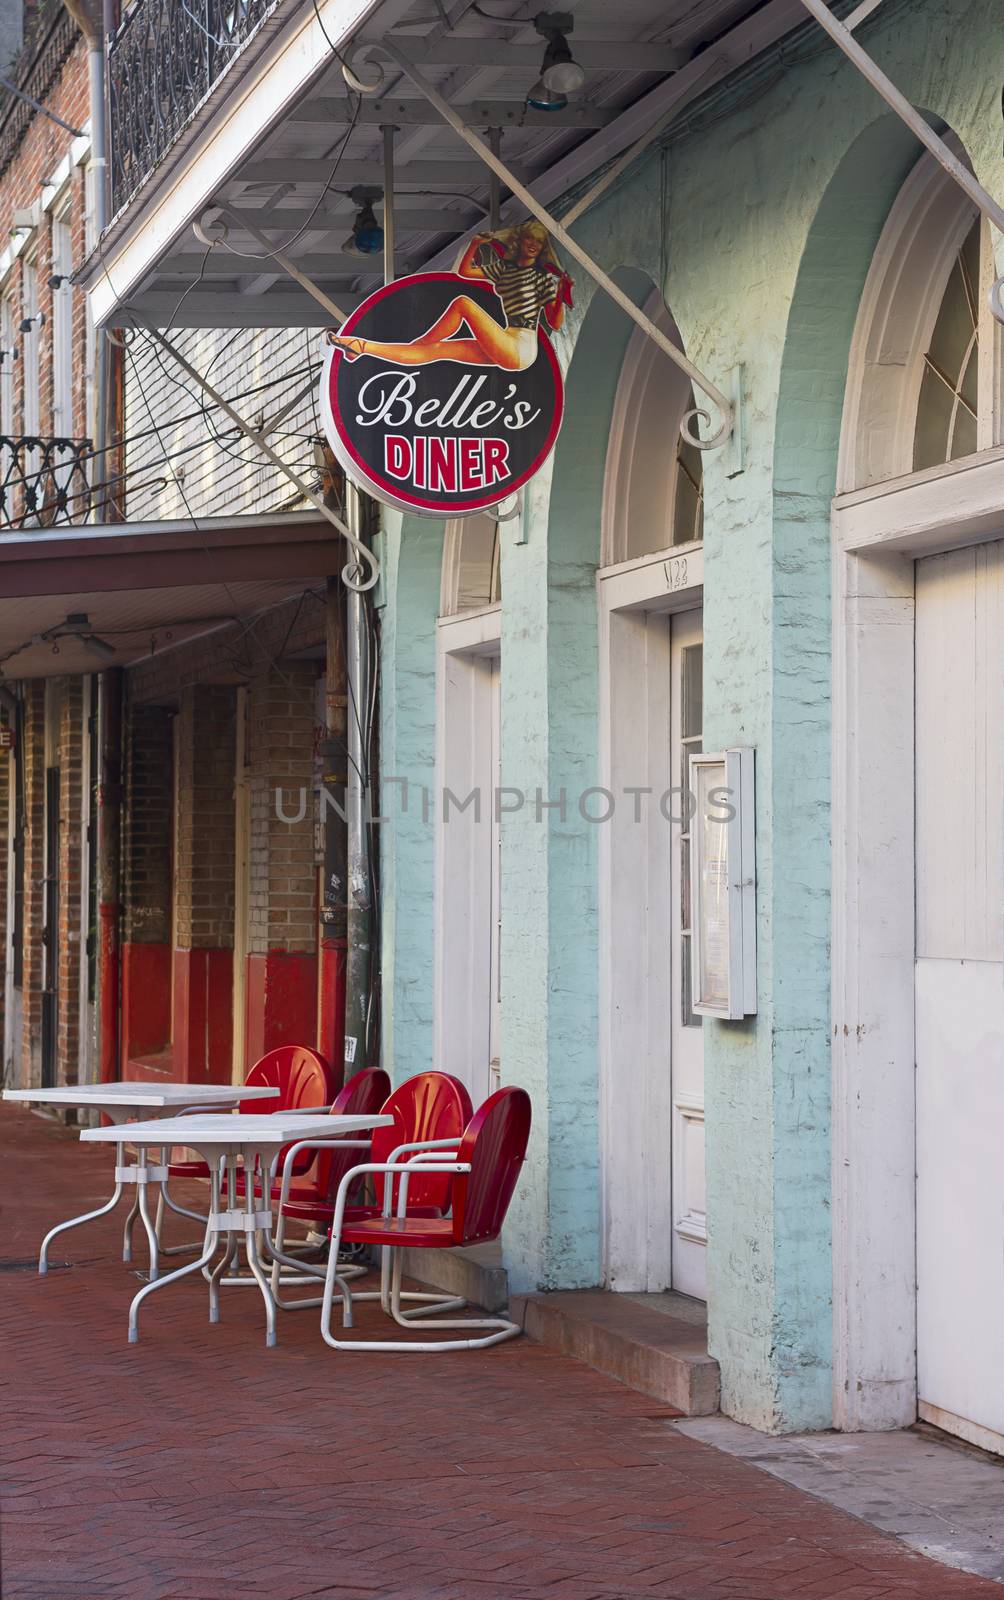 Outdoor terrace of a diner in New Orleans